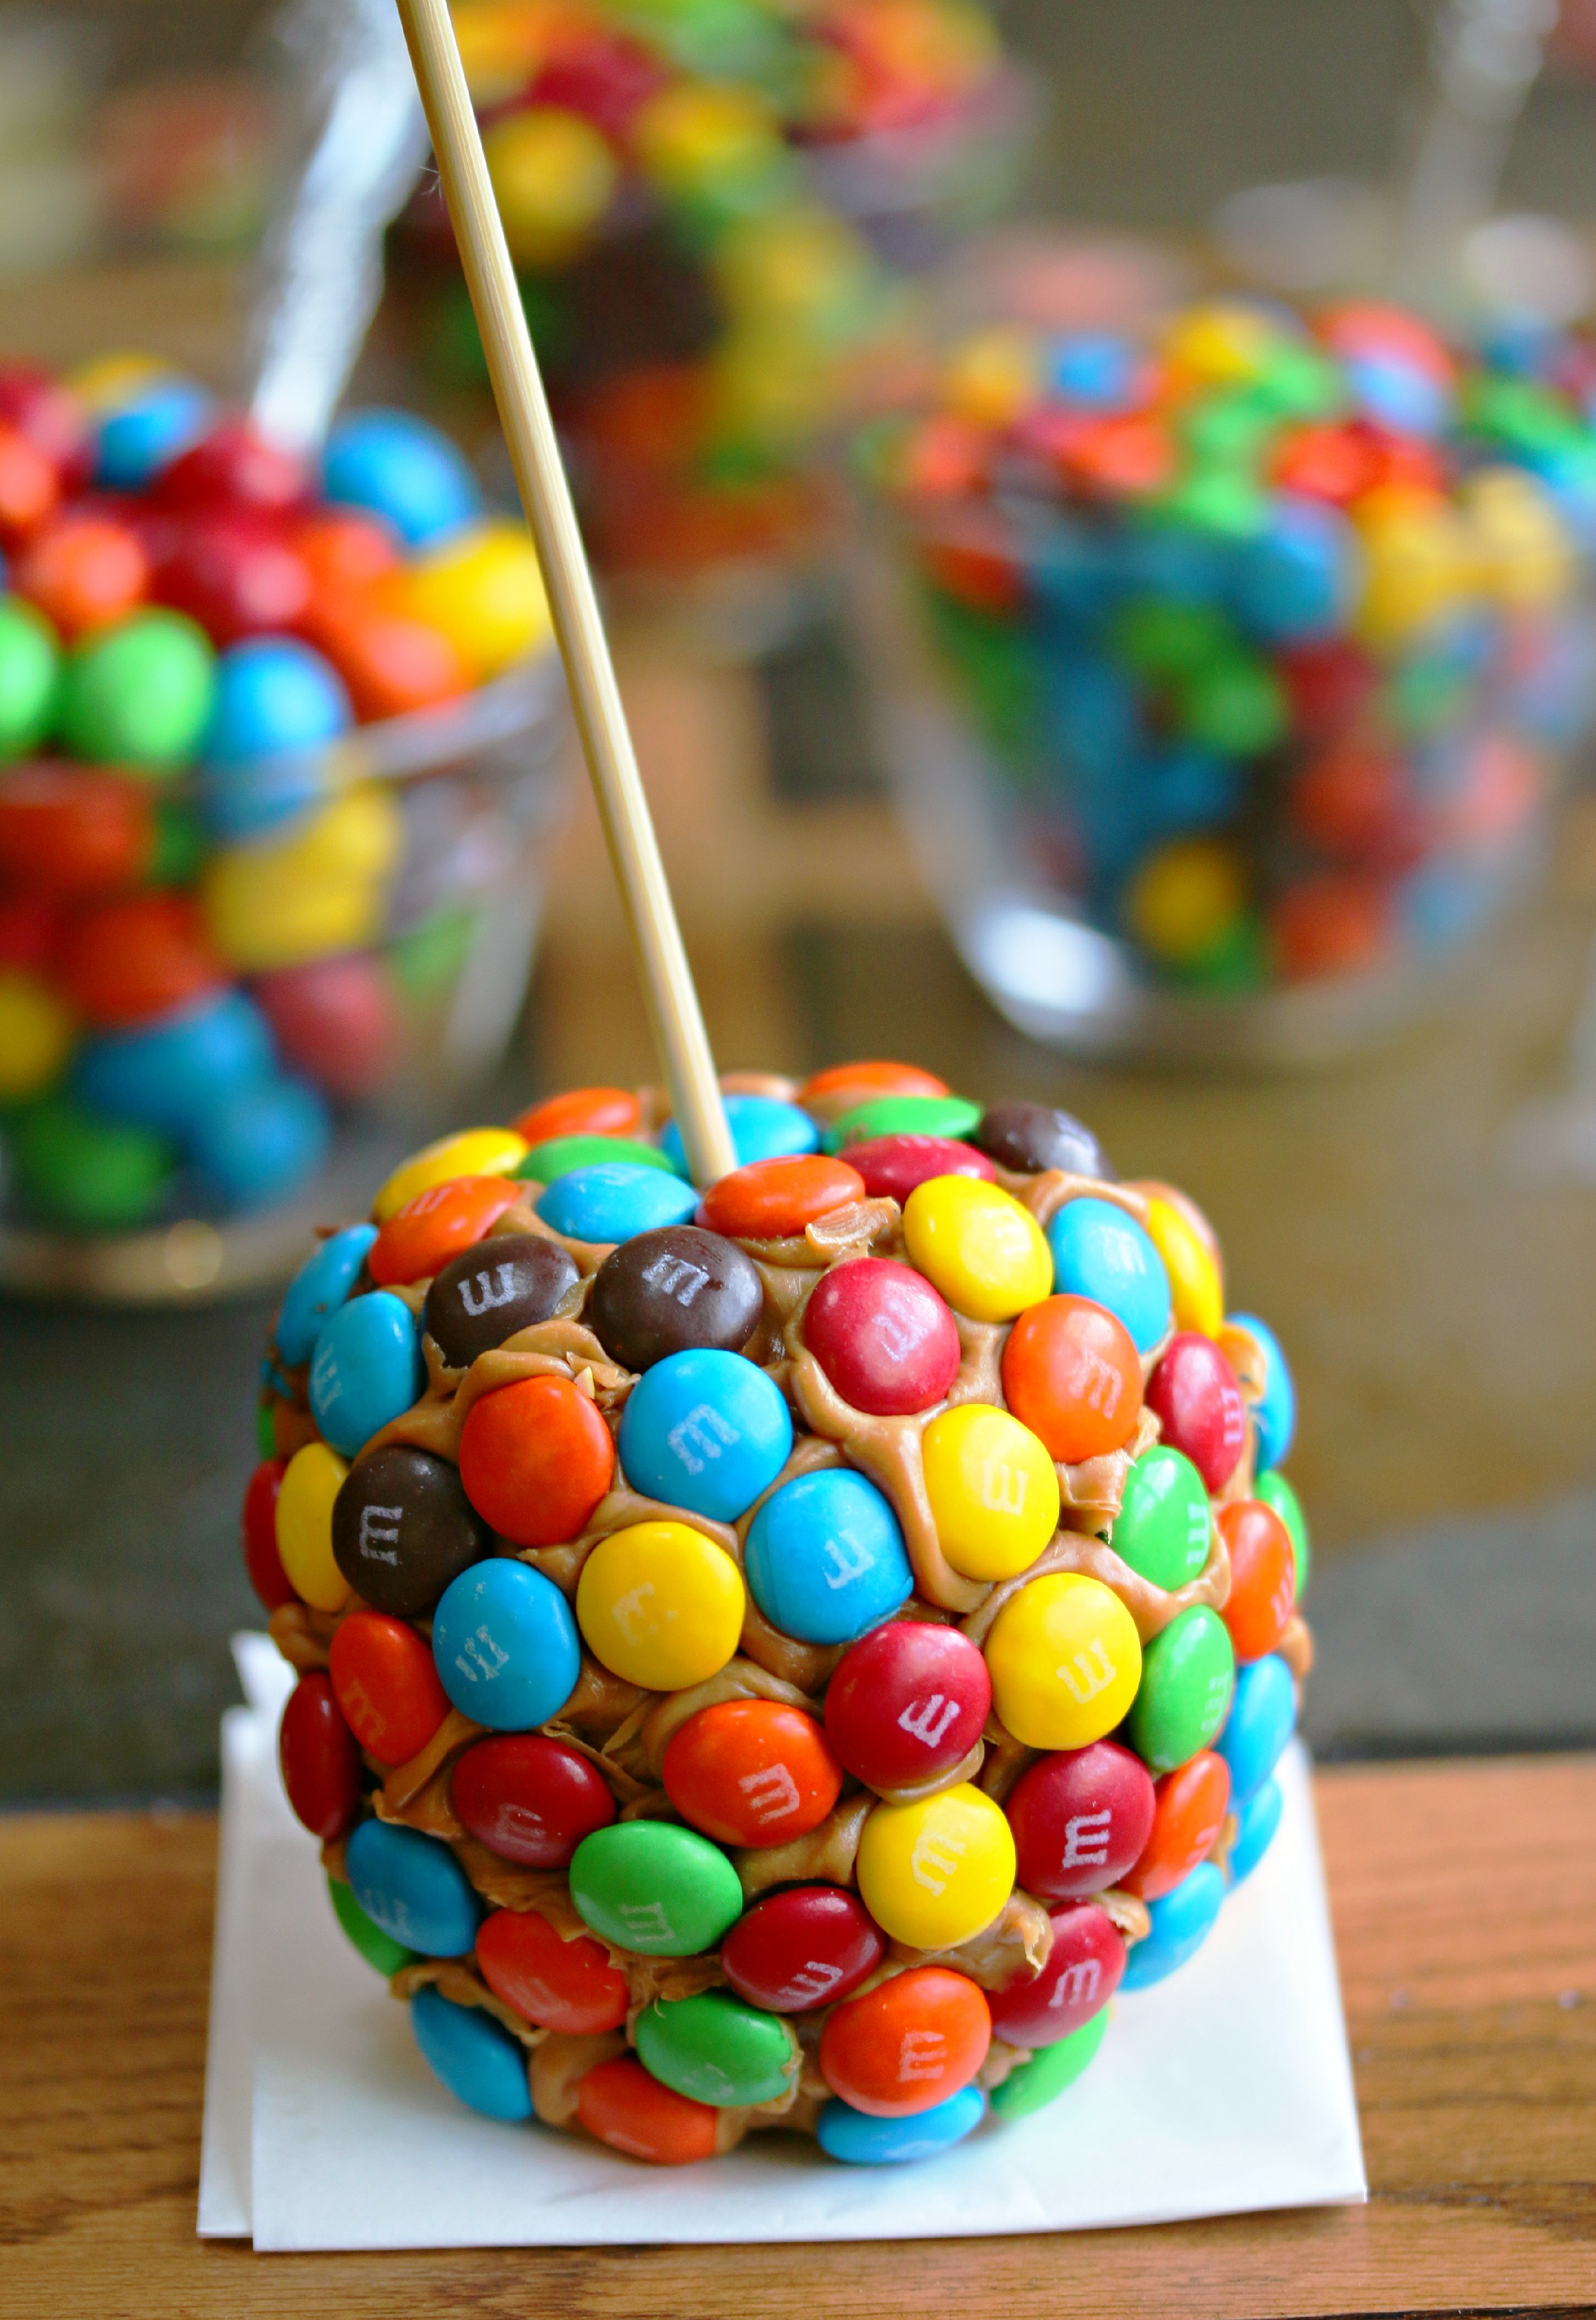 M&M's® Caramel Apples - The Cozy Cook